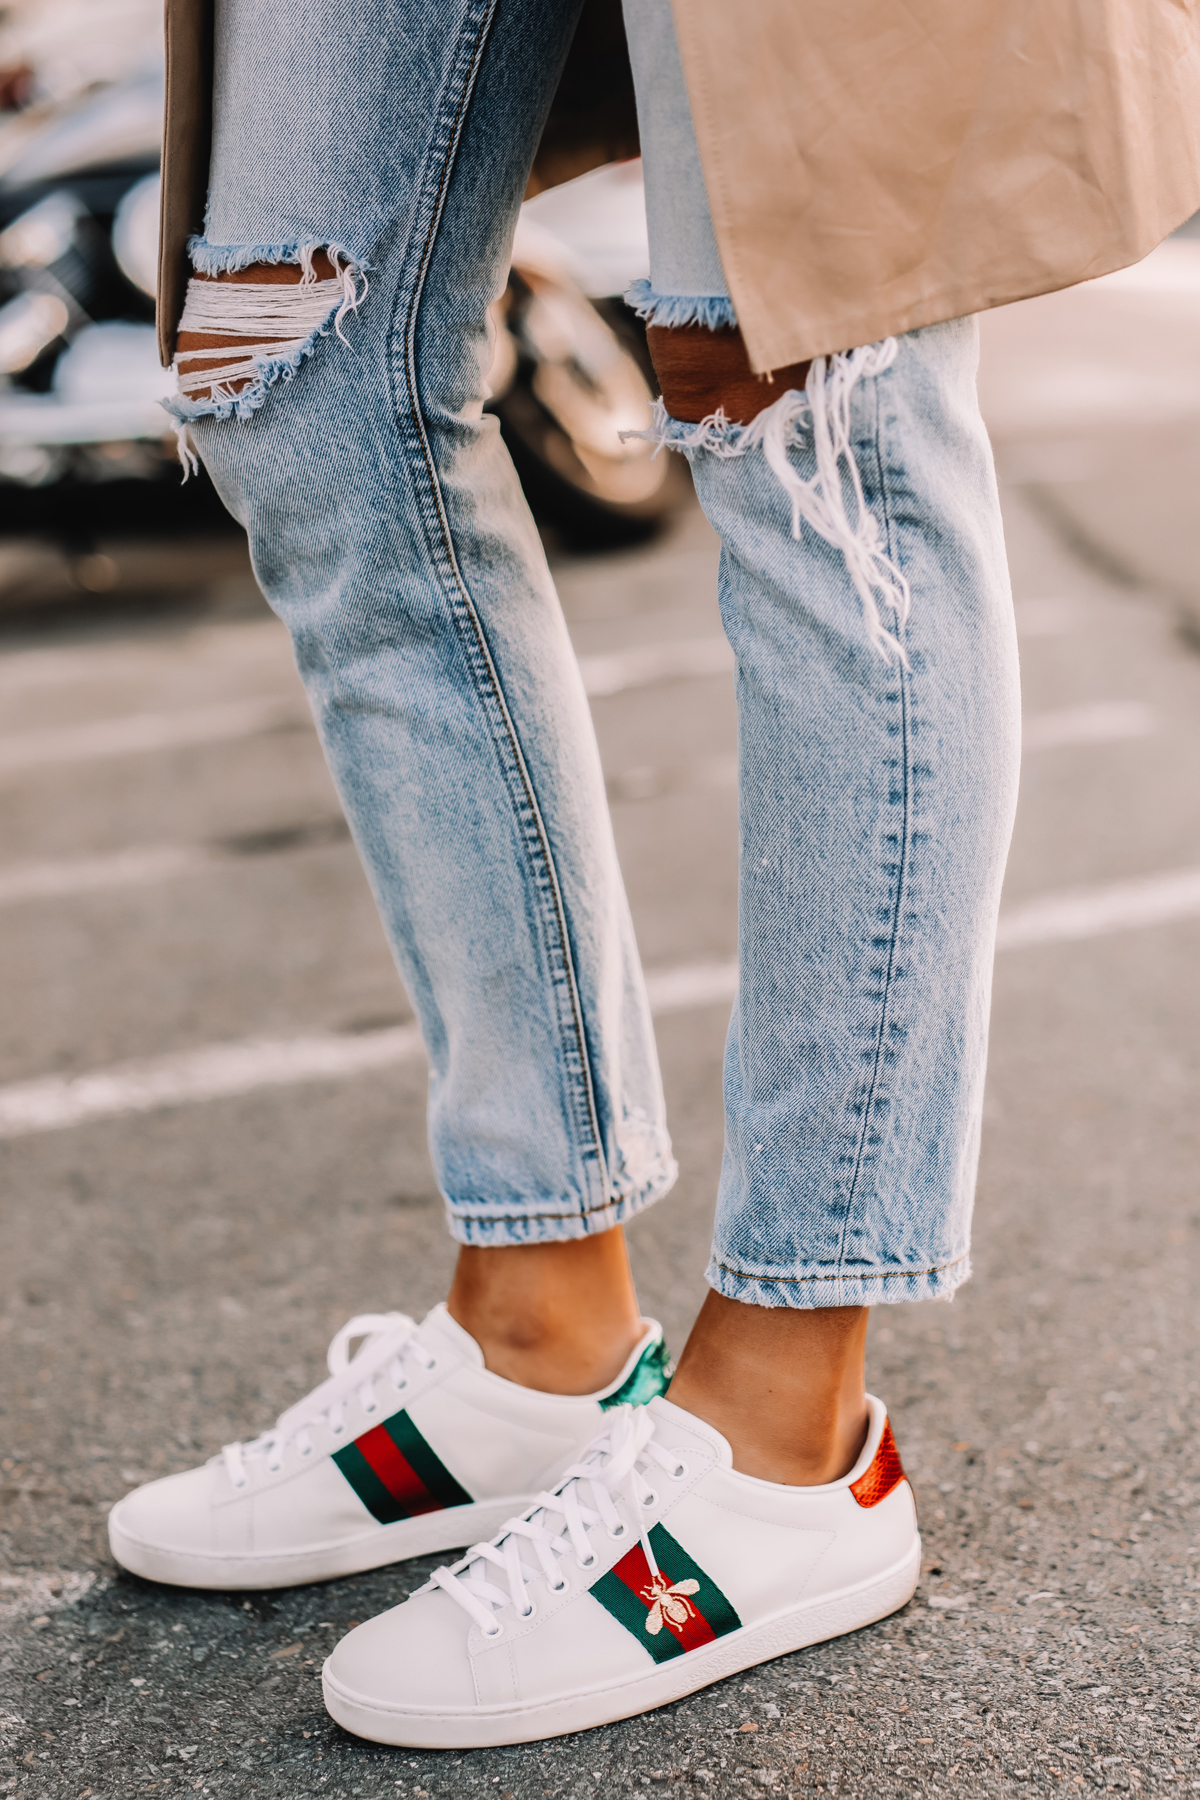 gucci loved sneakers womens